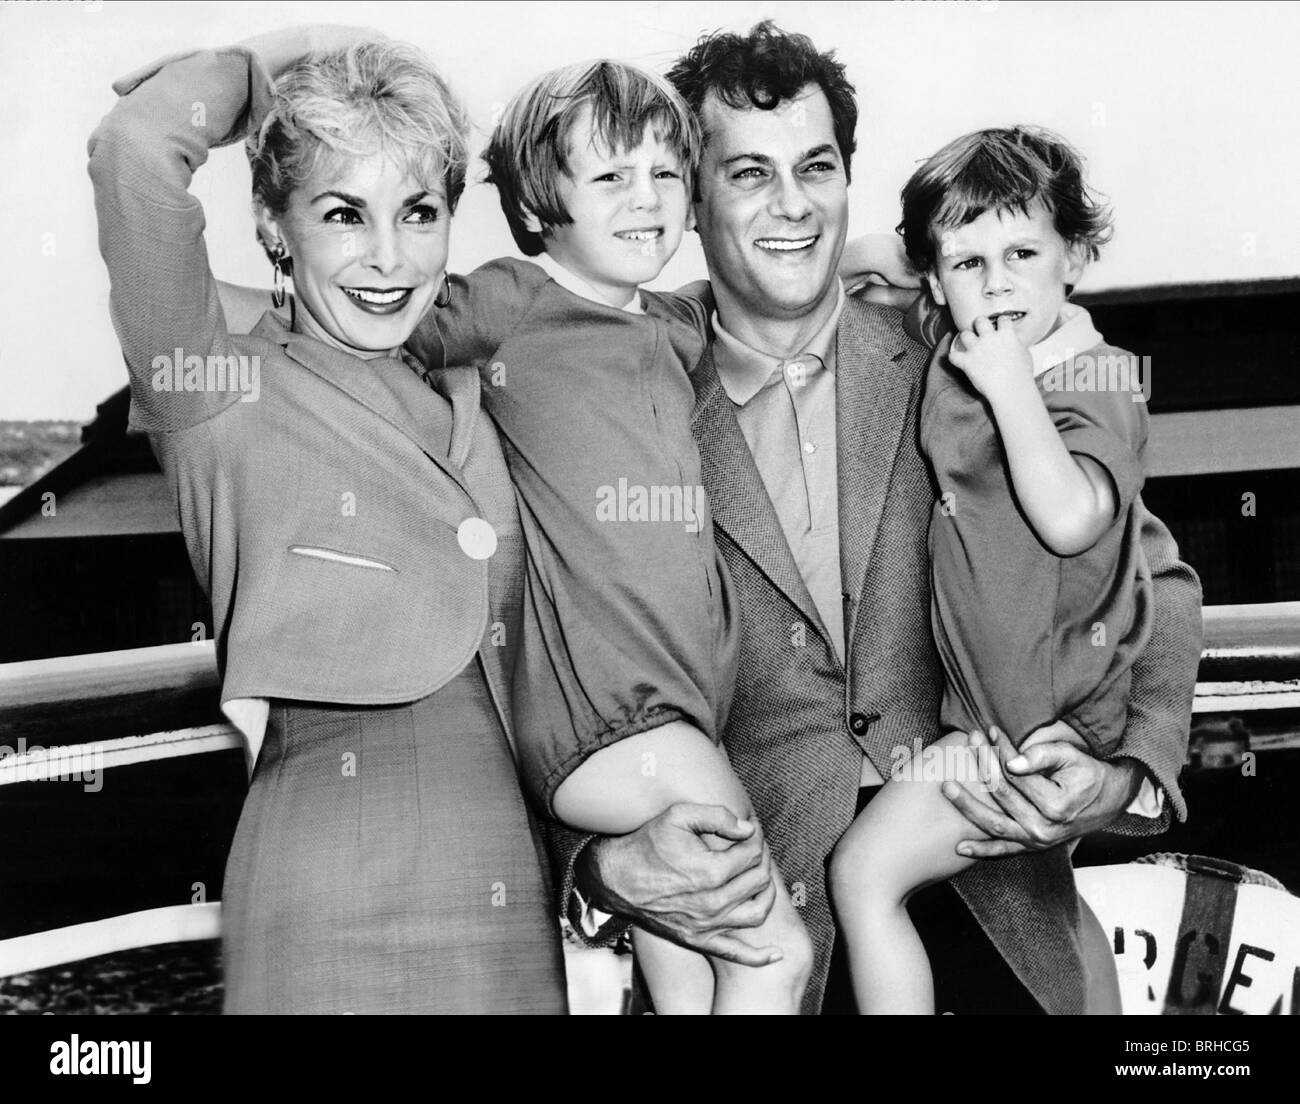 JANET LEIGH TONY CURTIS KELLY & JAMIE LEE CURTIS ACTOR & ACTRESS WITH  CHILDREN (1961 Stock Photo - Alamy